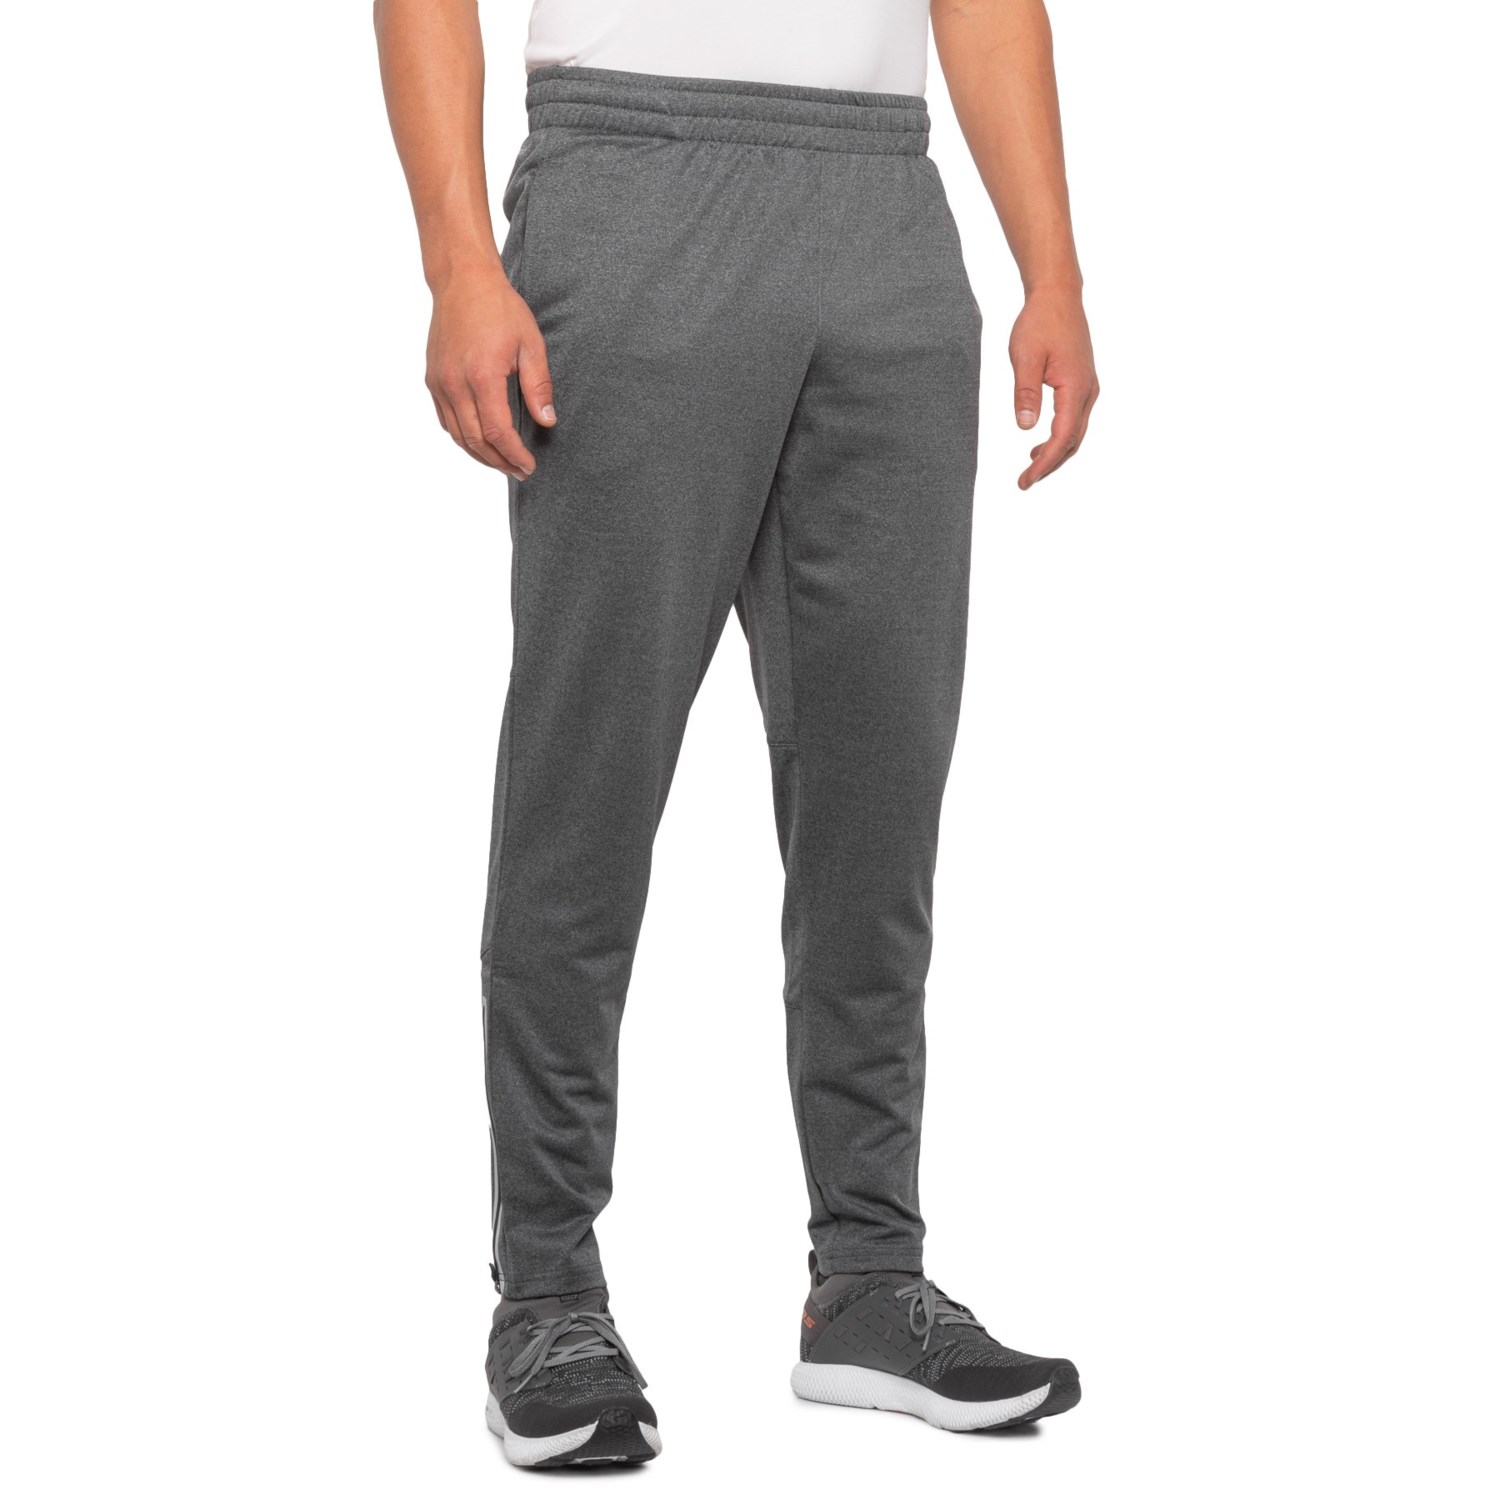 Hind Bonded Running Pants (For Men) - Save 25%